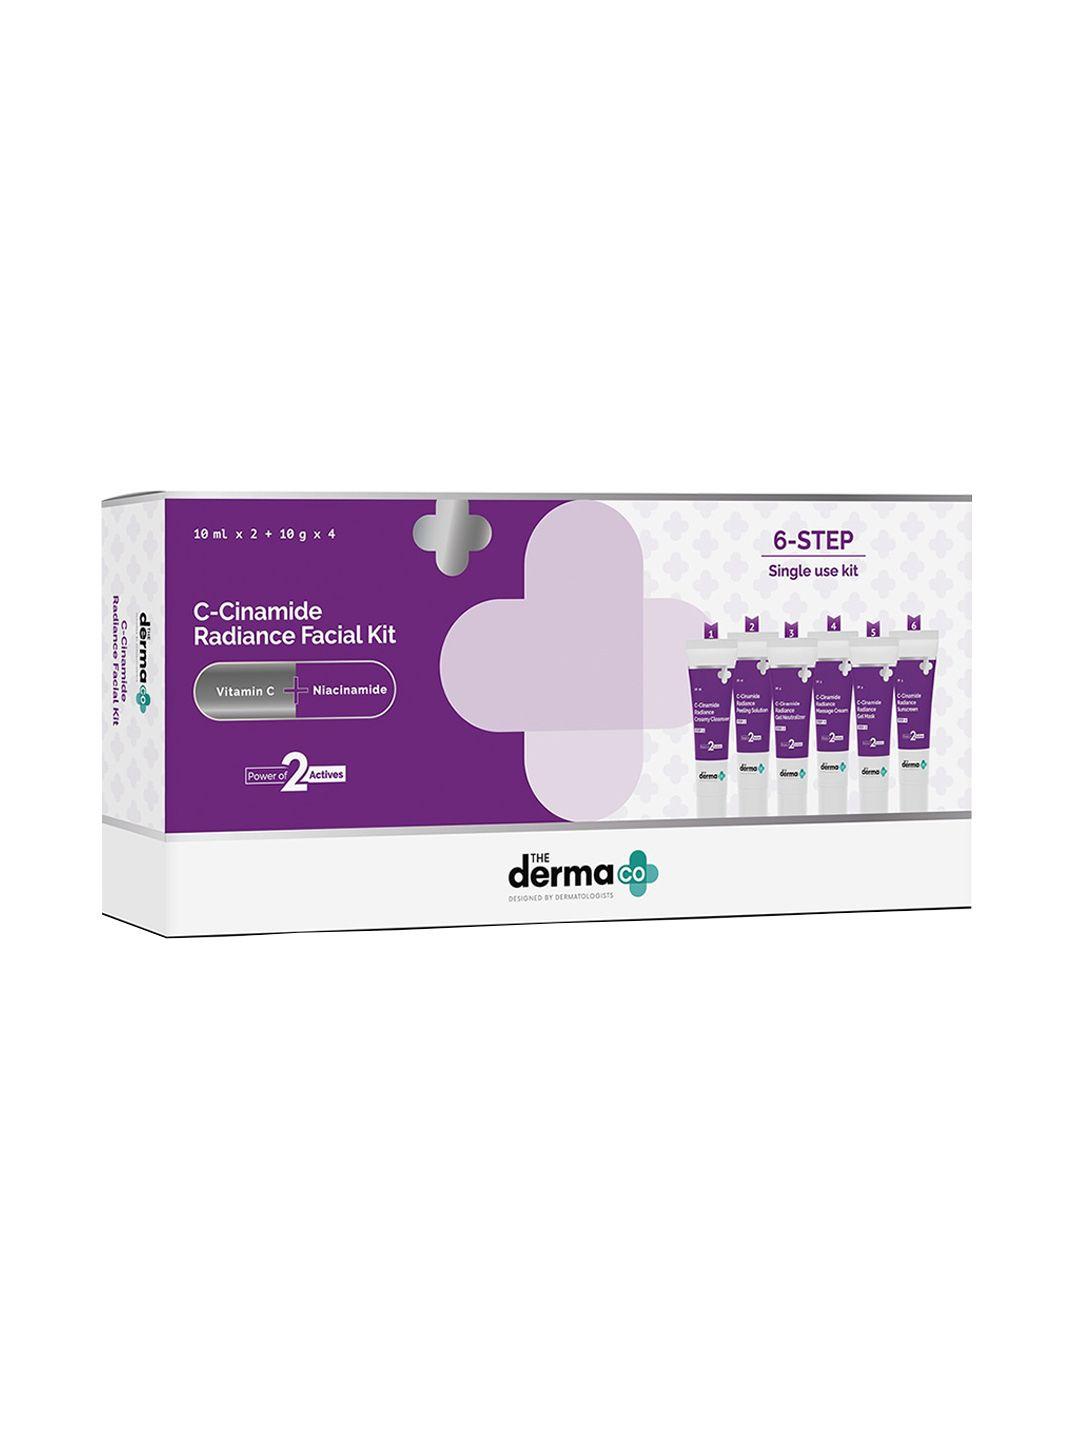 the-derma-co.-c-cinamide-radiance-facial-kit-with-vitamin-c-&-niacinamide---30-ml-each